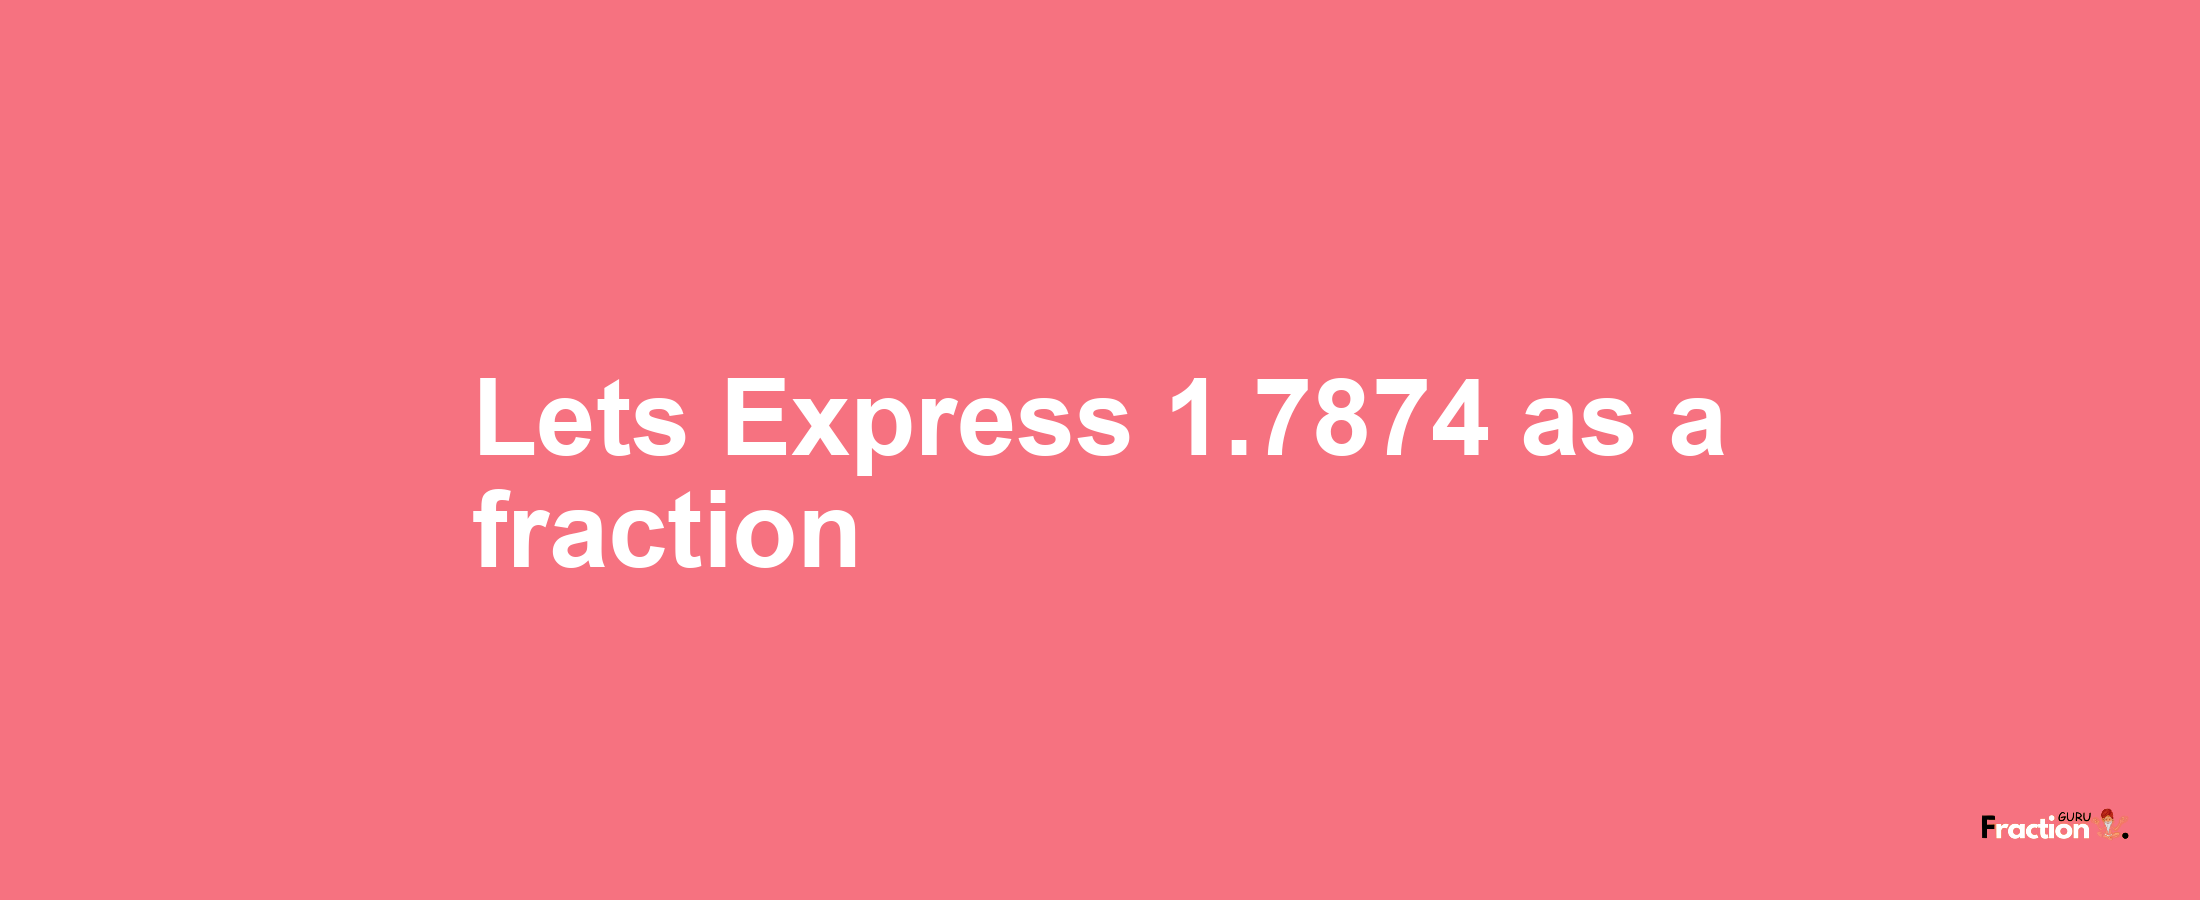 Lets Express 1.7874 as afraction